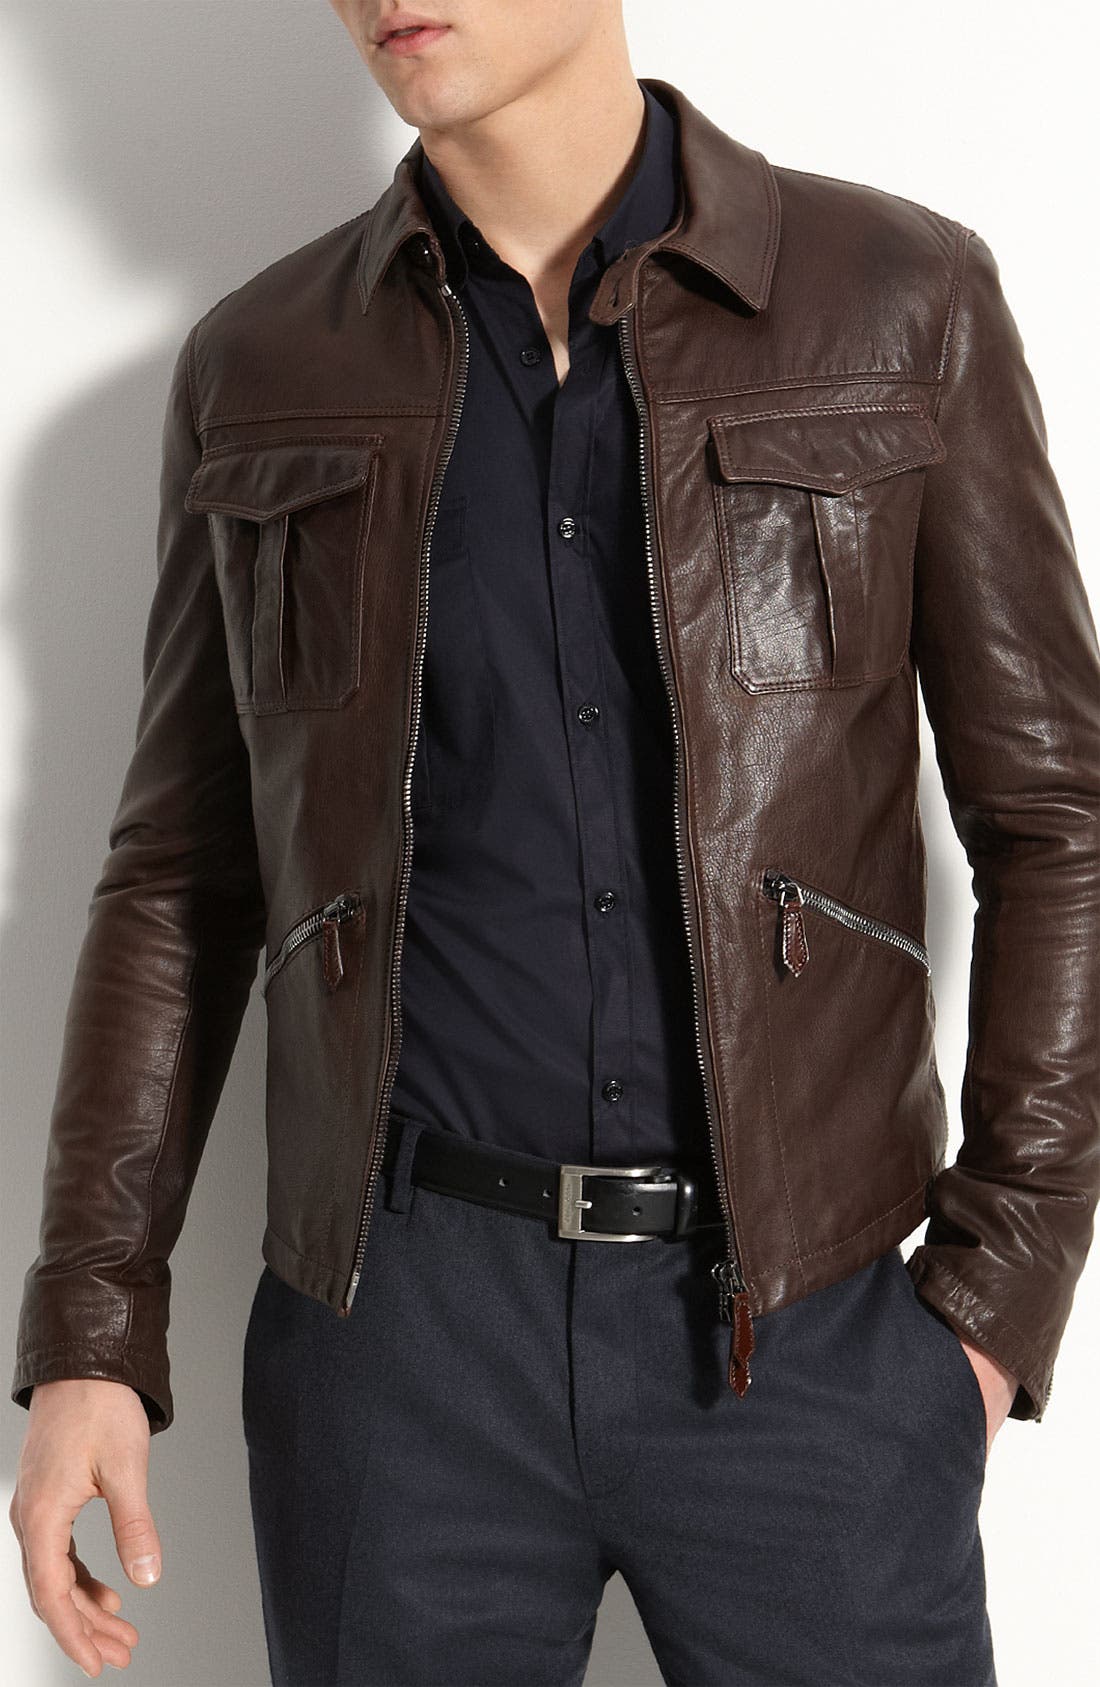 burberry leather jackets